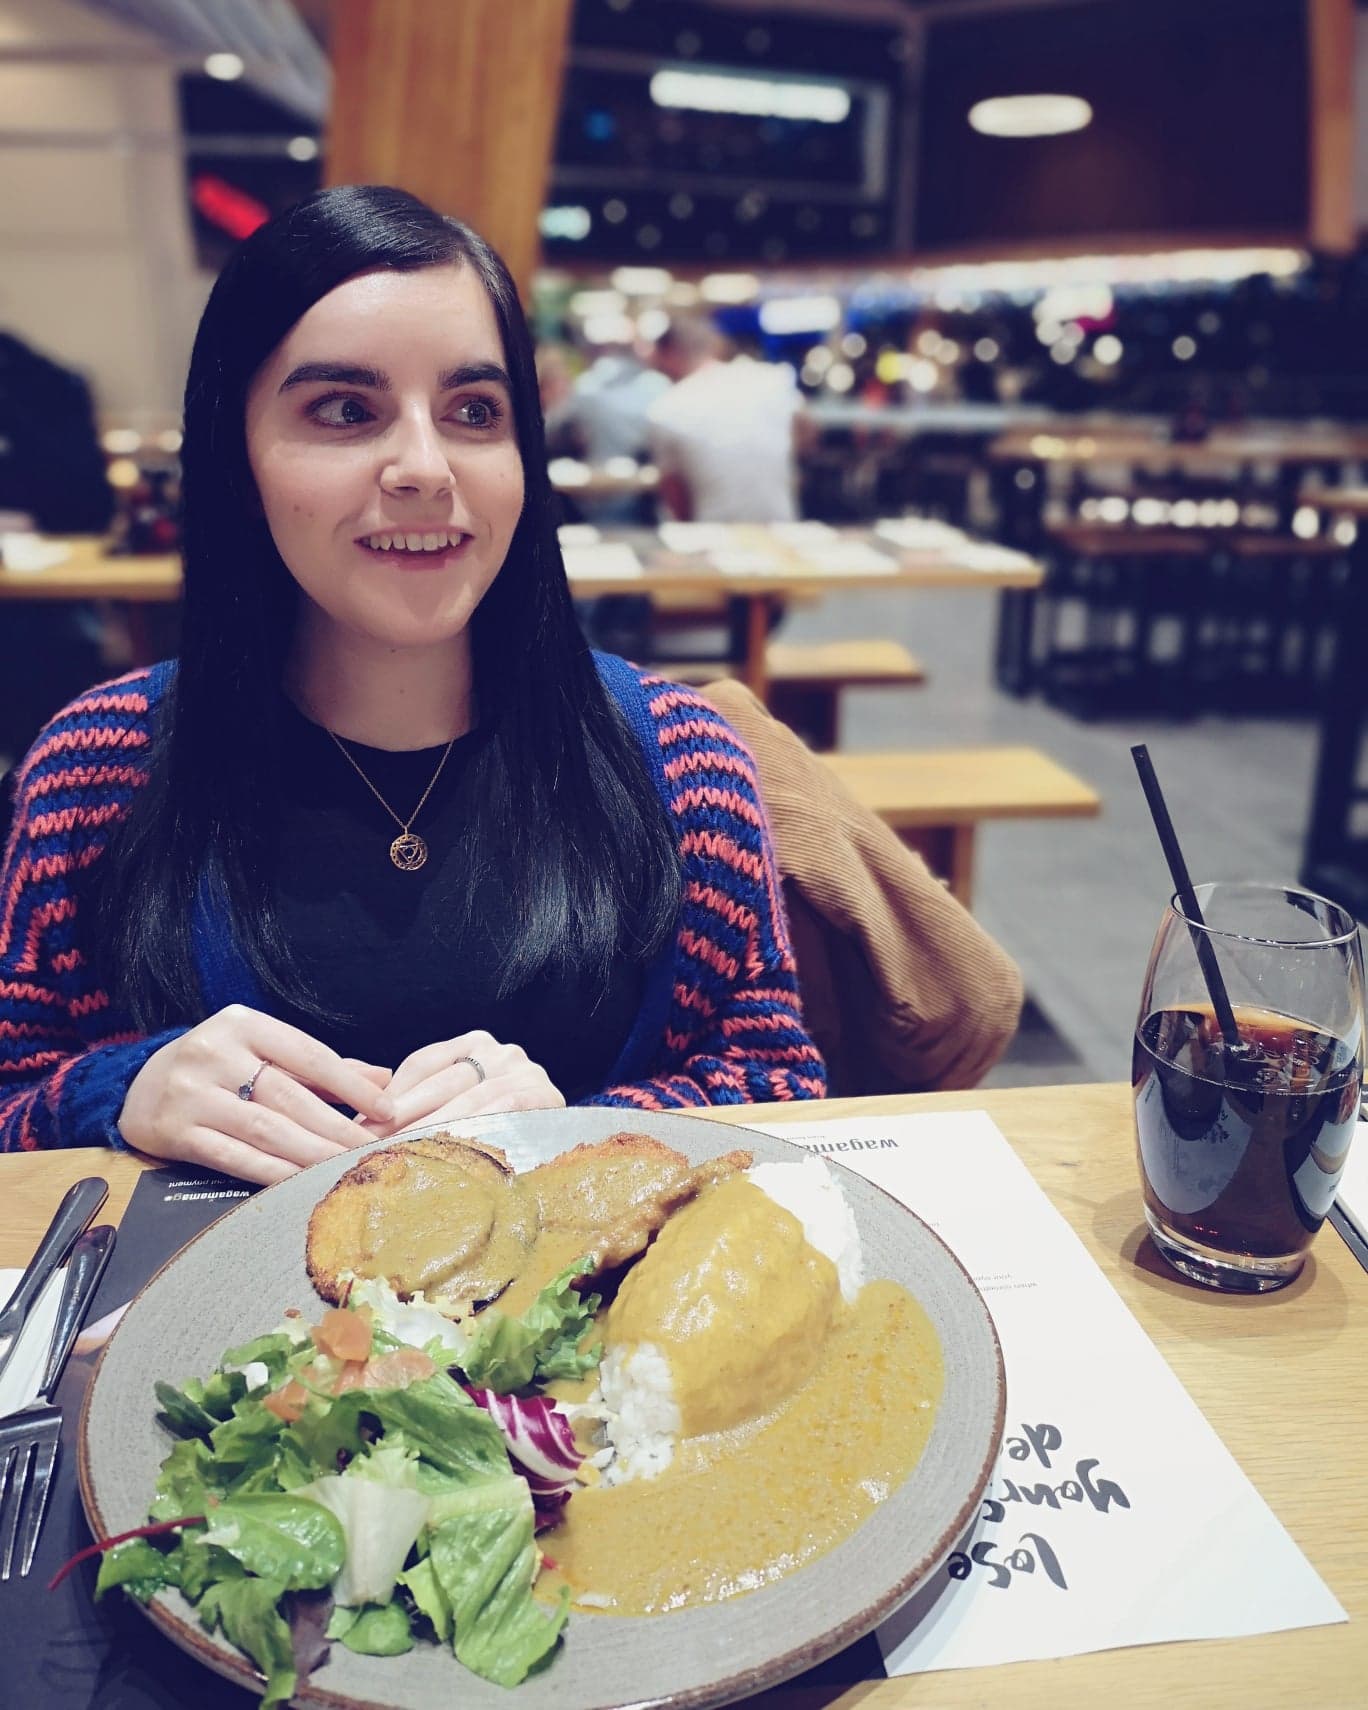 Emma is sitting in Wagamama with a vegan curry. She is wearing a blue and orange stripe cardigan and a black top. She is looking off to the side smiling.